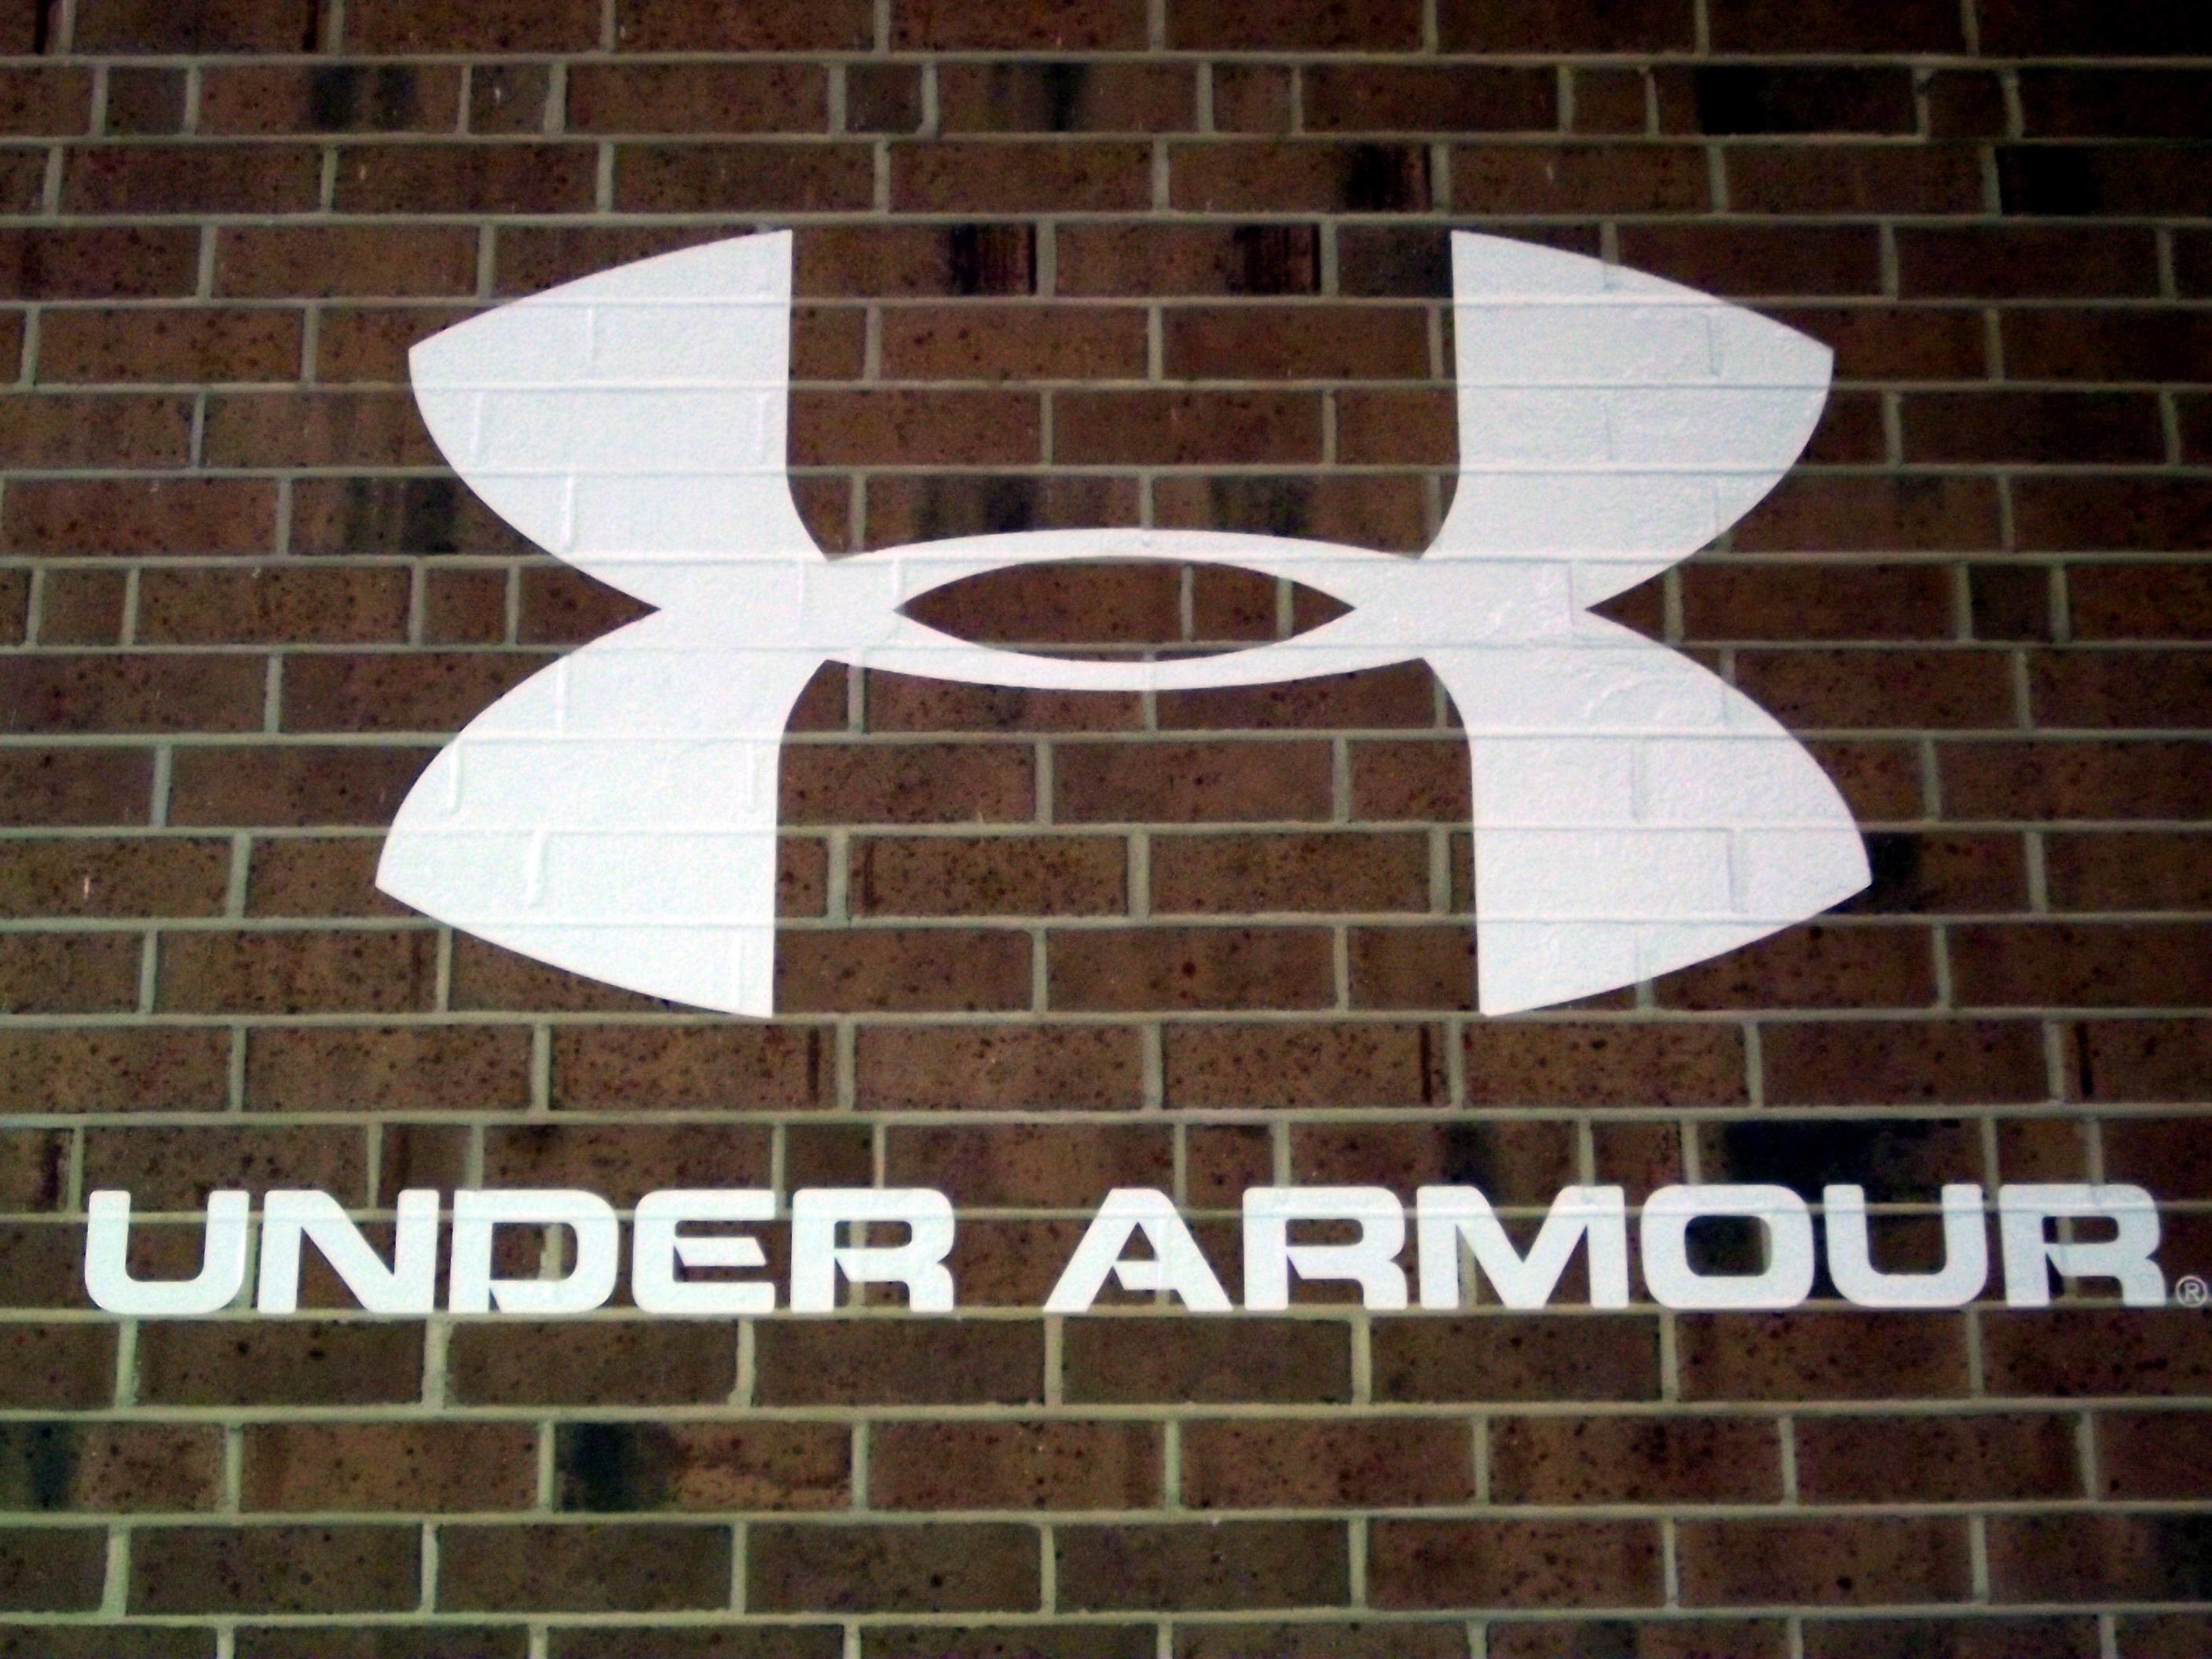 2816x2112 Images For > Under Armor Logo